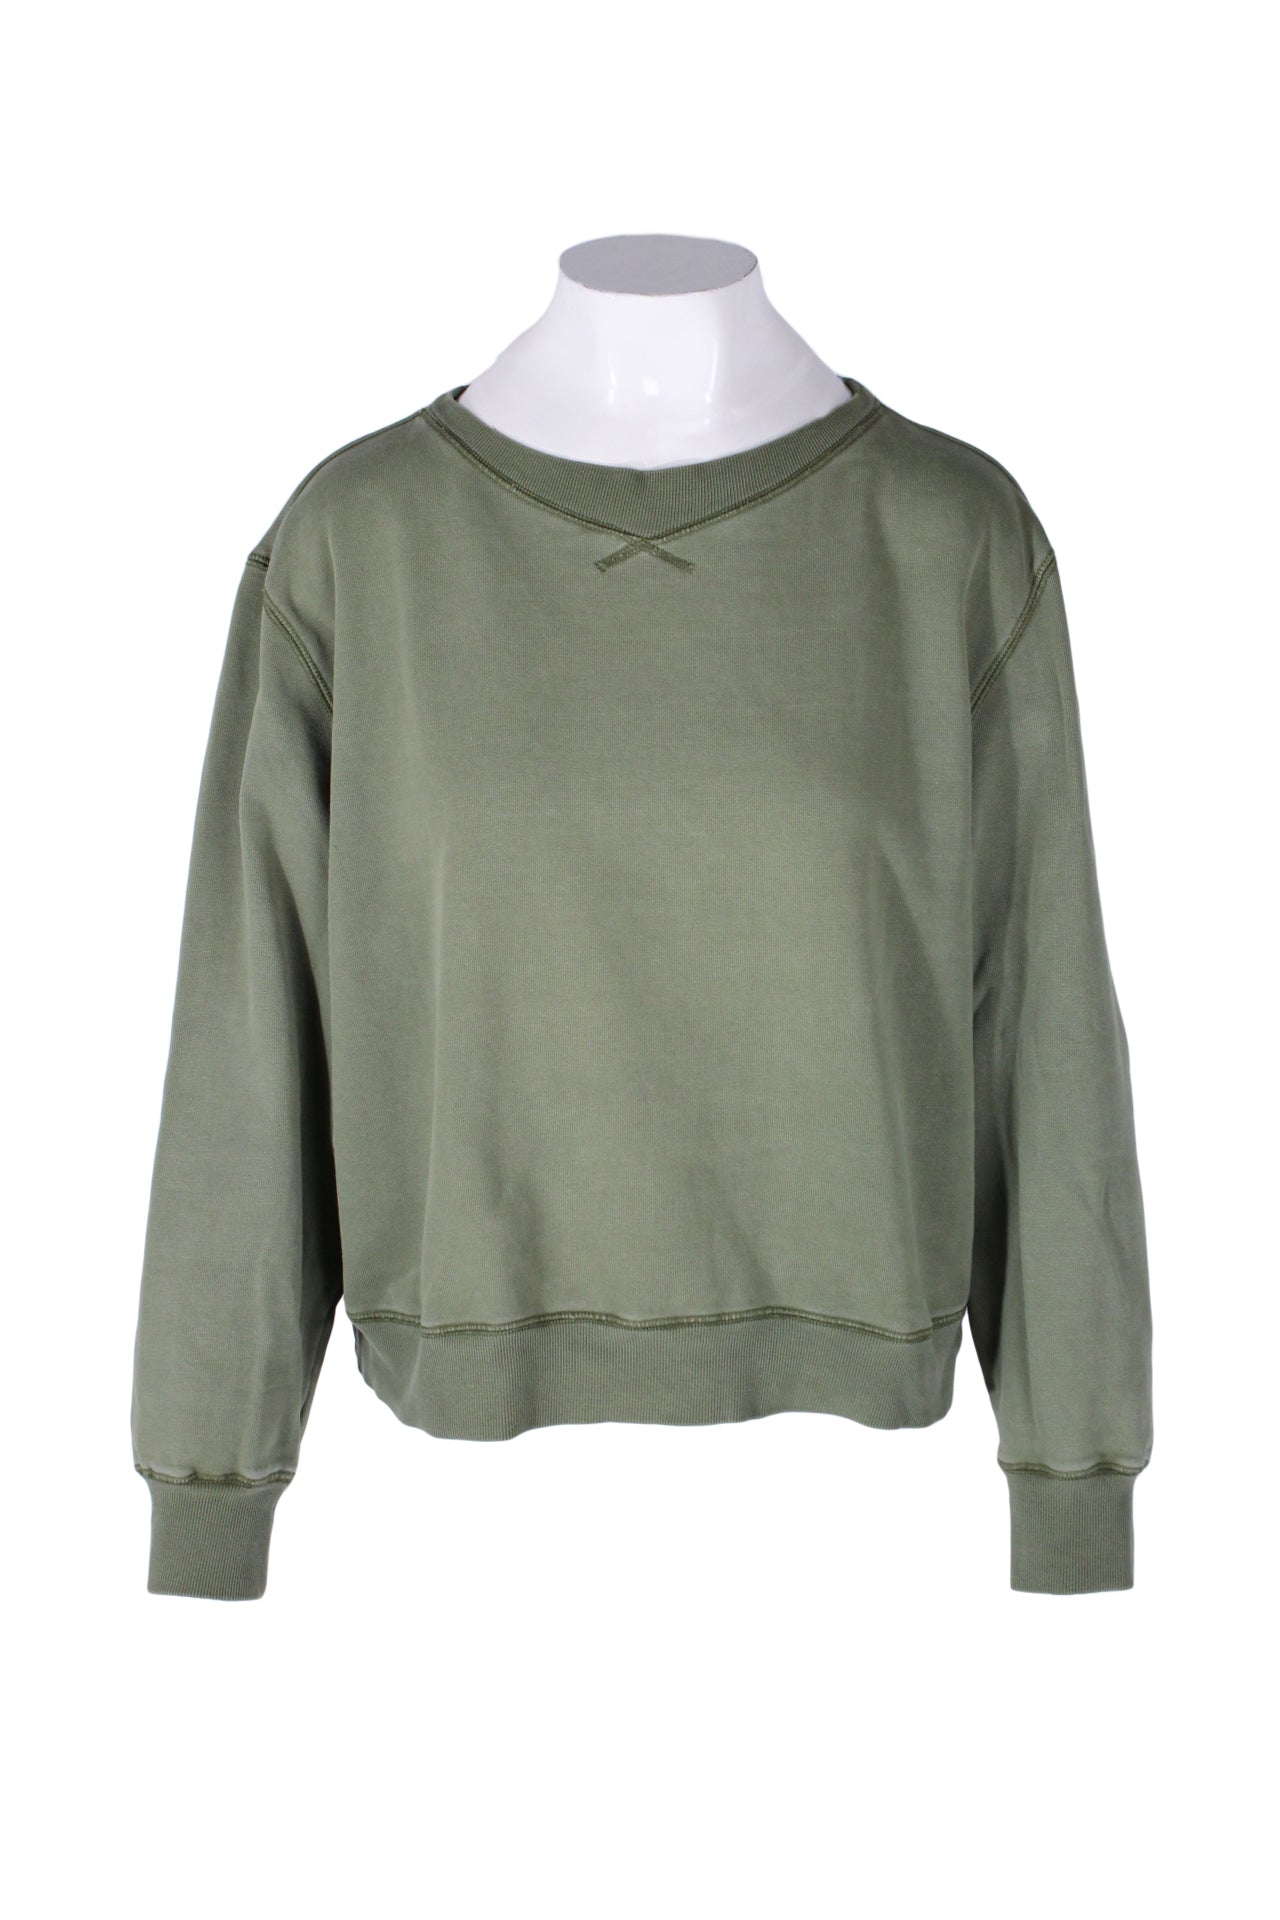 front angle alex mill sage green pullover cotton sweatshirt on feminine mannequin torso featuring exposed serging details, boxy cut, and rib knit crew collar/cuffs/waistband. 